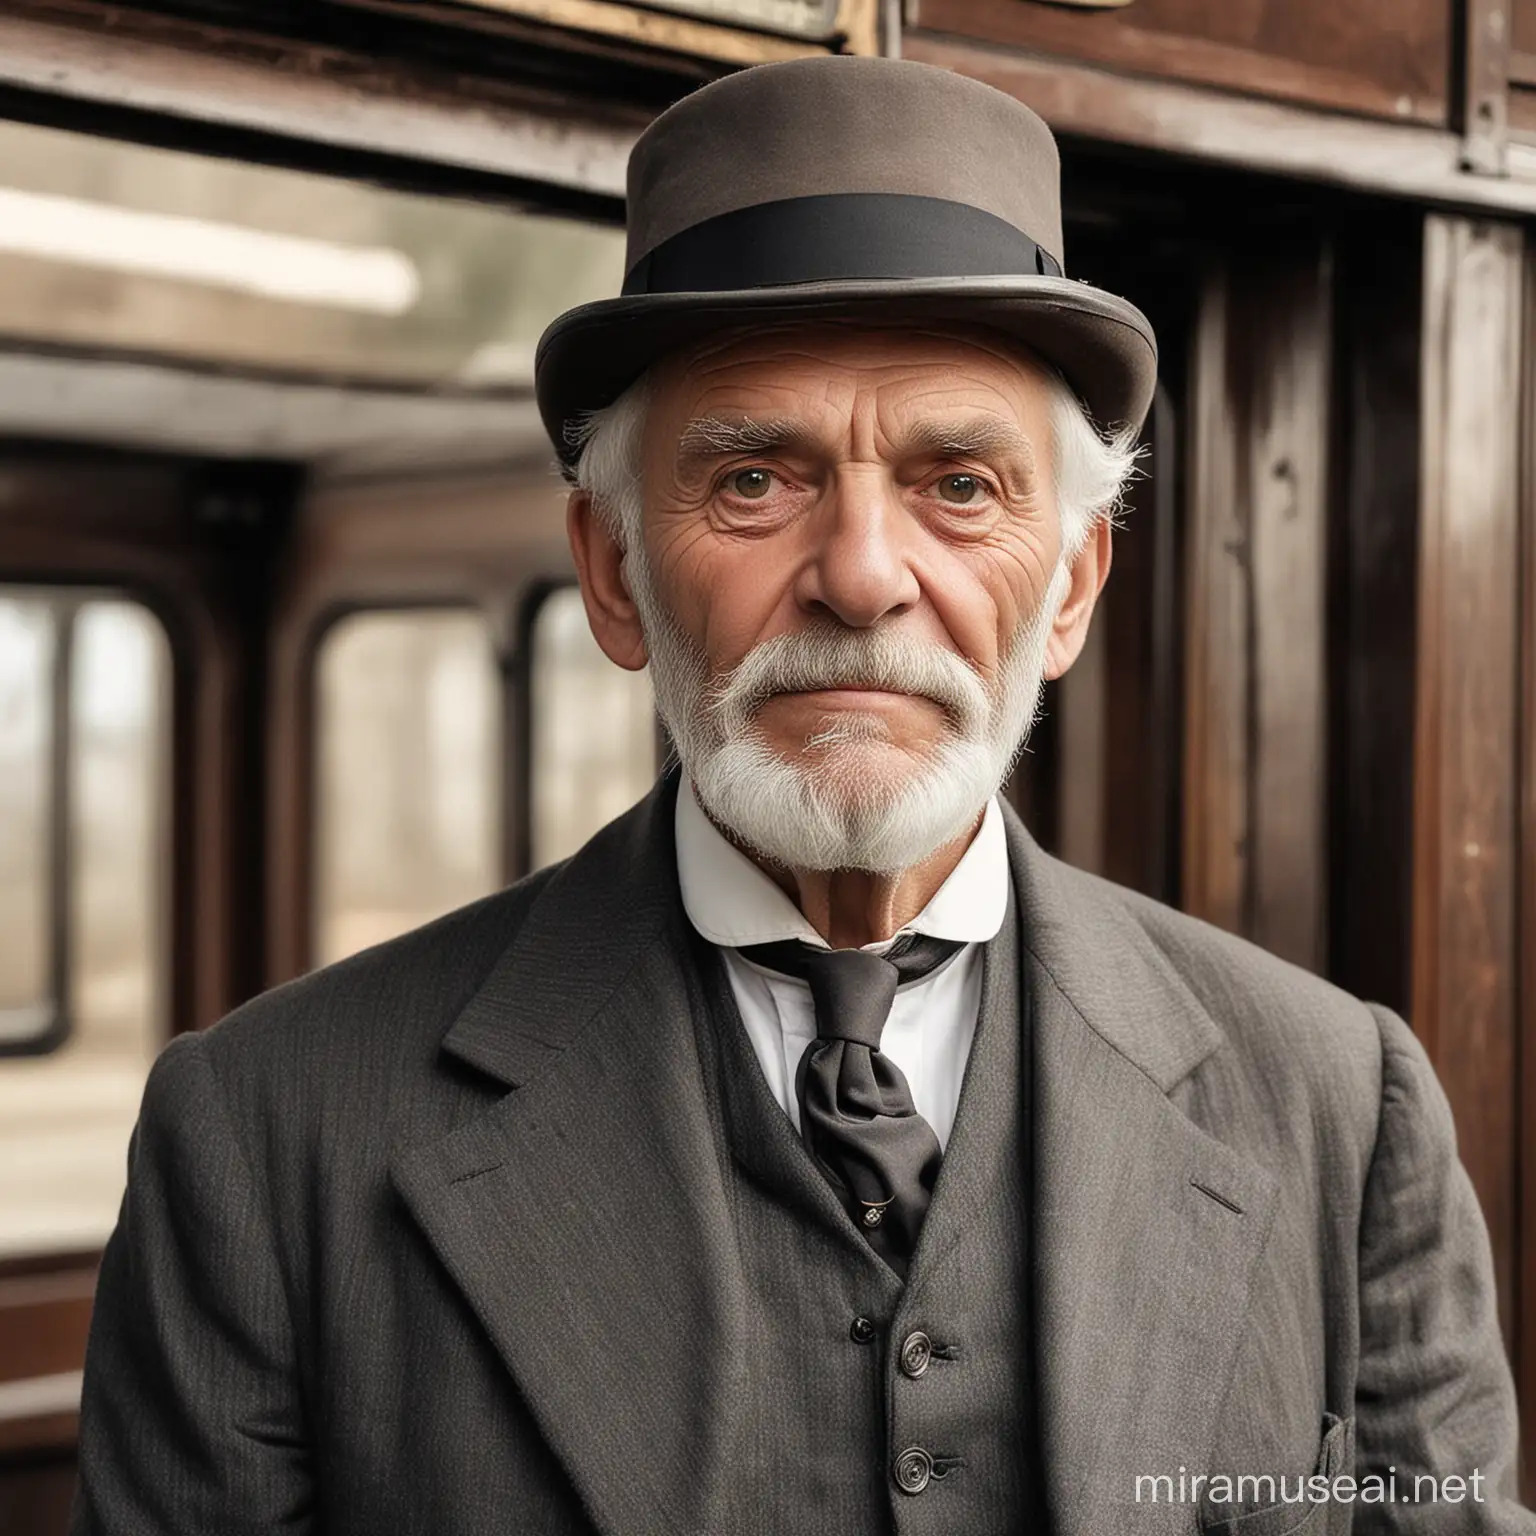 Vintage Train Conductor from 1901